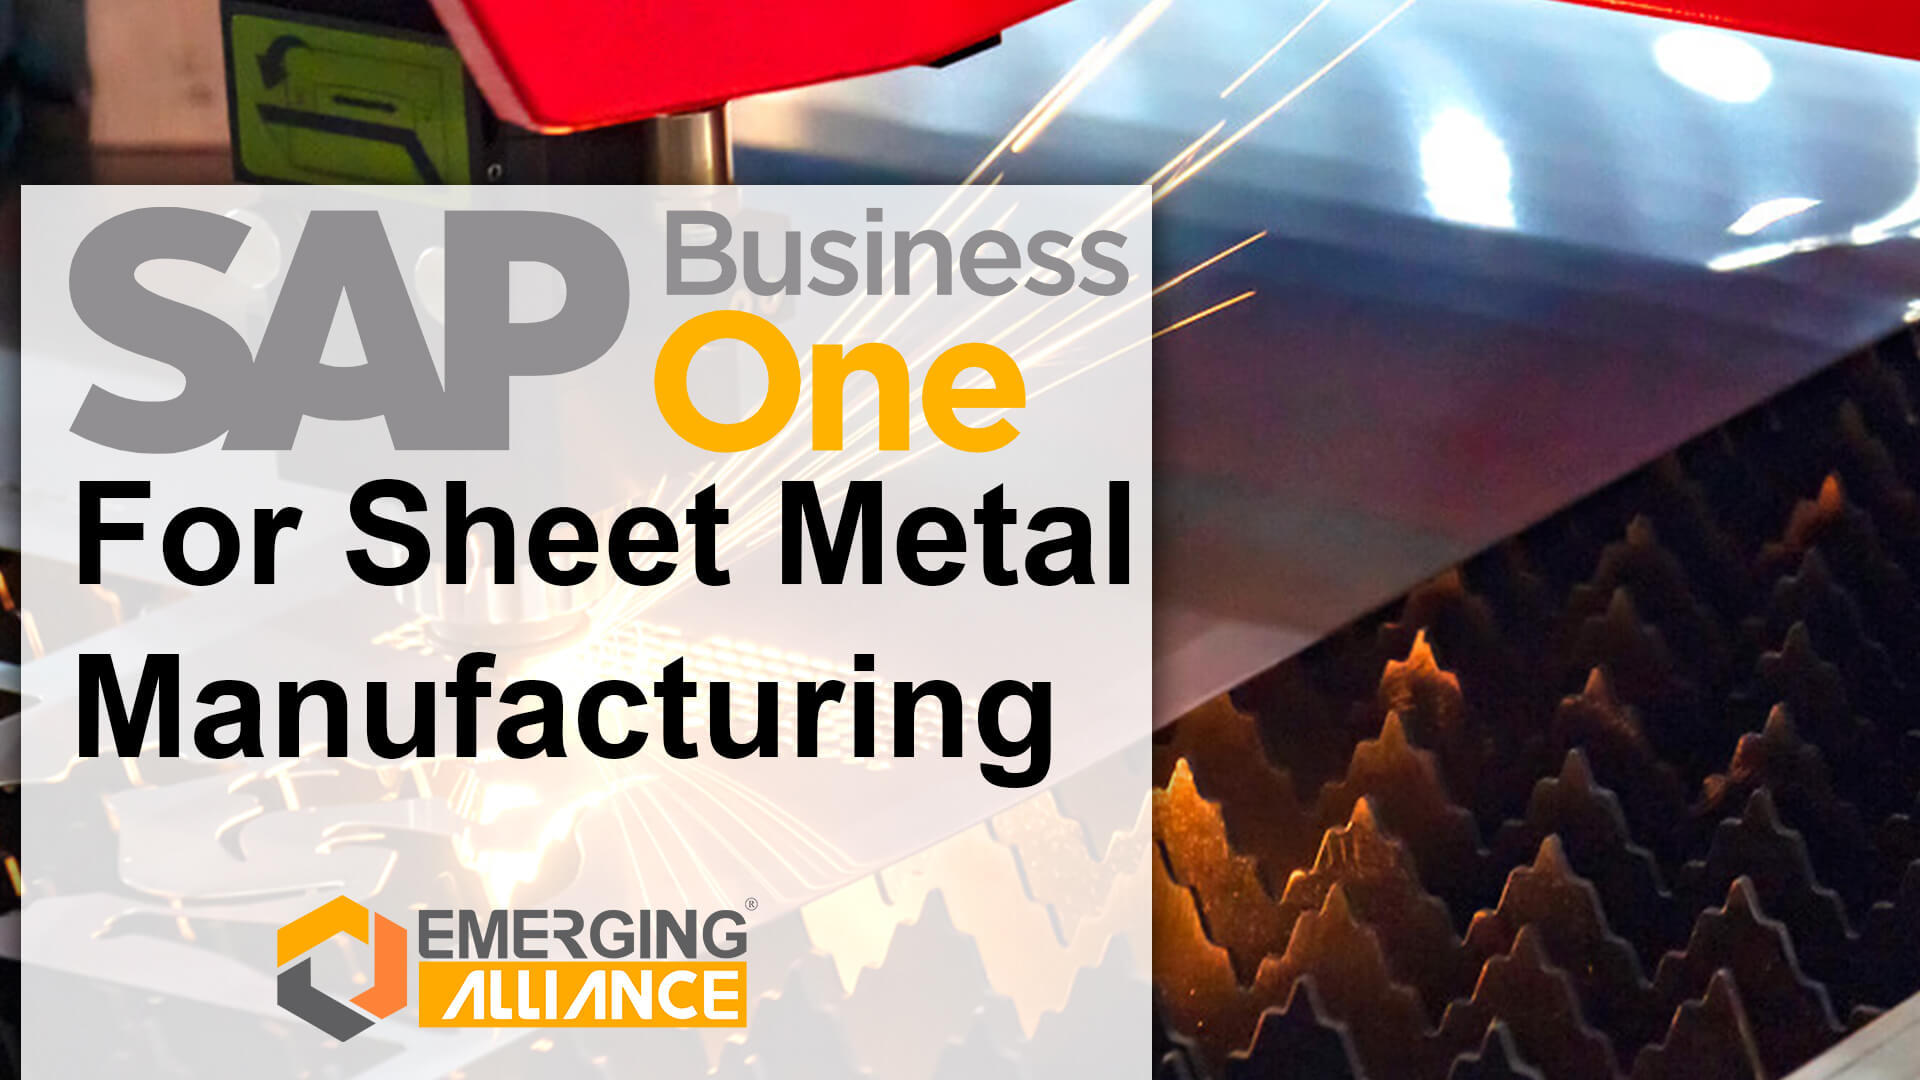 sap business one for sheet metal manufacturing